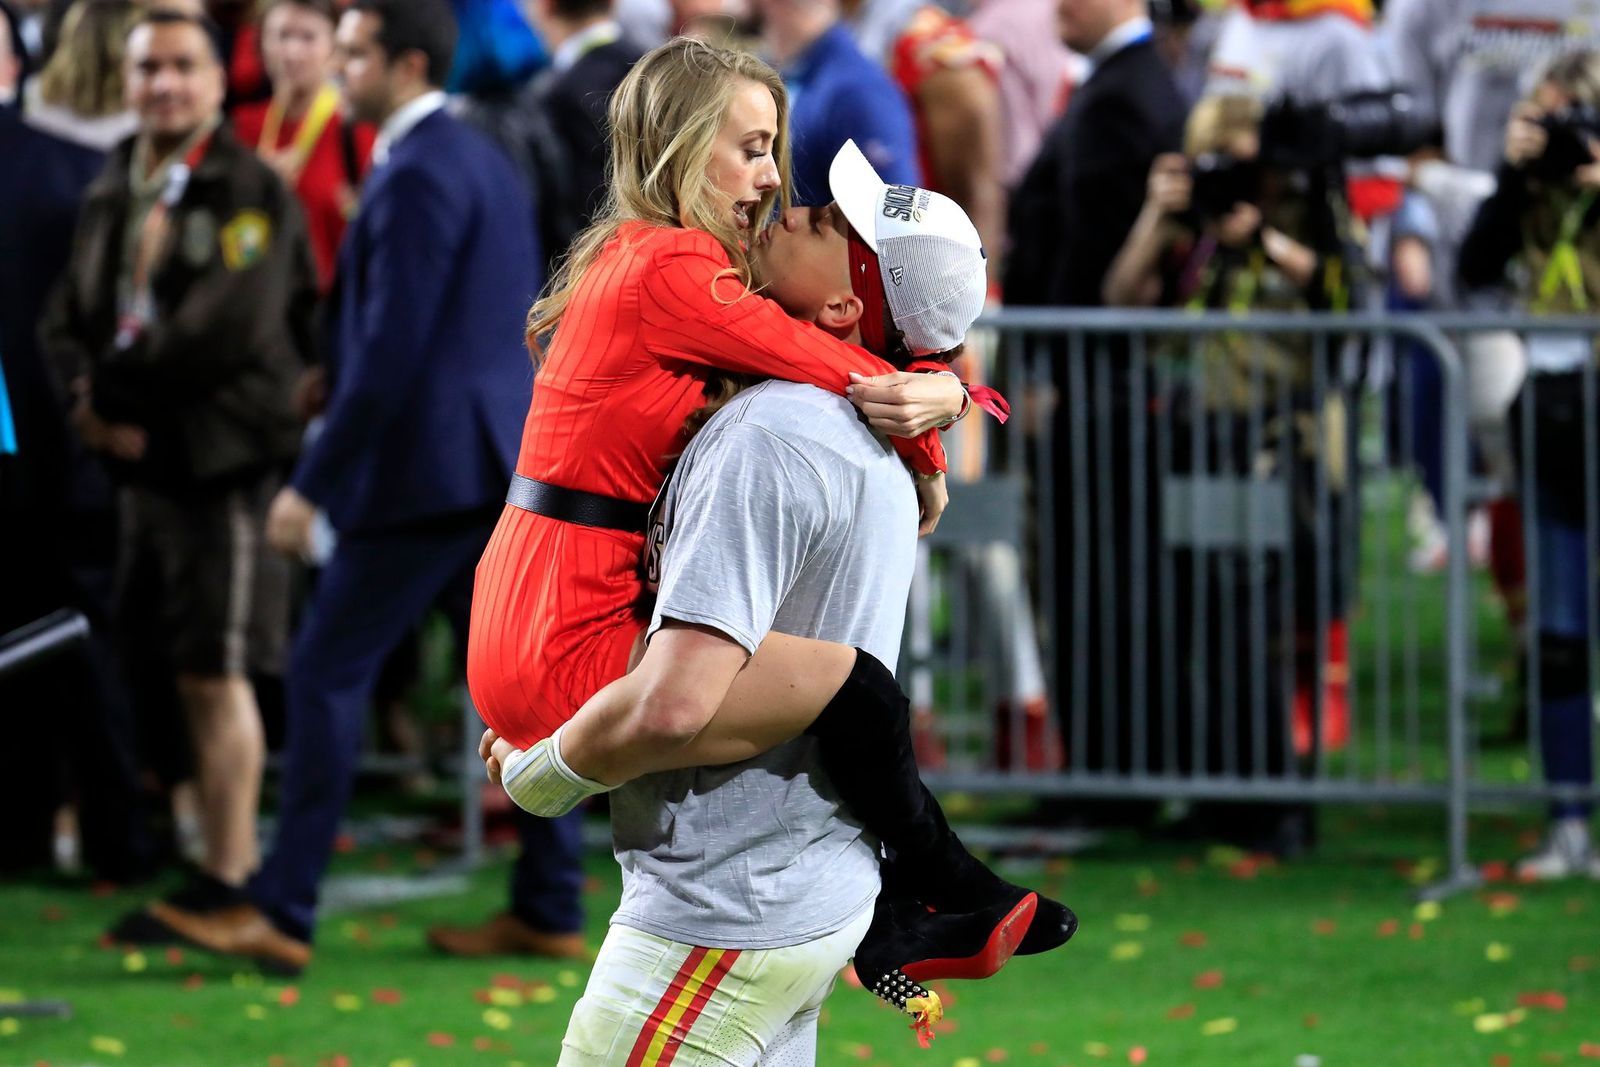 Patrick Mahomes celebrates with Brittany Matthews after defeating the San Francisco 49ers in Super Bowl LIV on February 02, 2020, in Miami, Florida | Photo: Andy Lyons/Getty Images